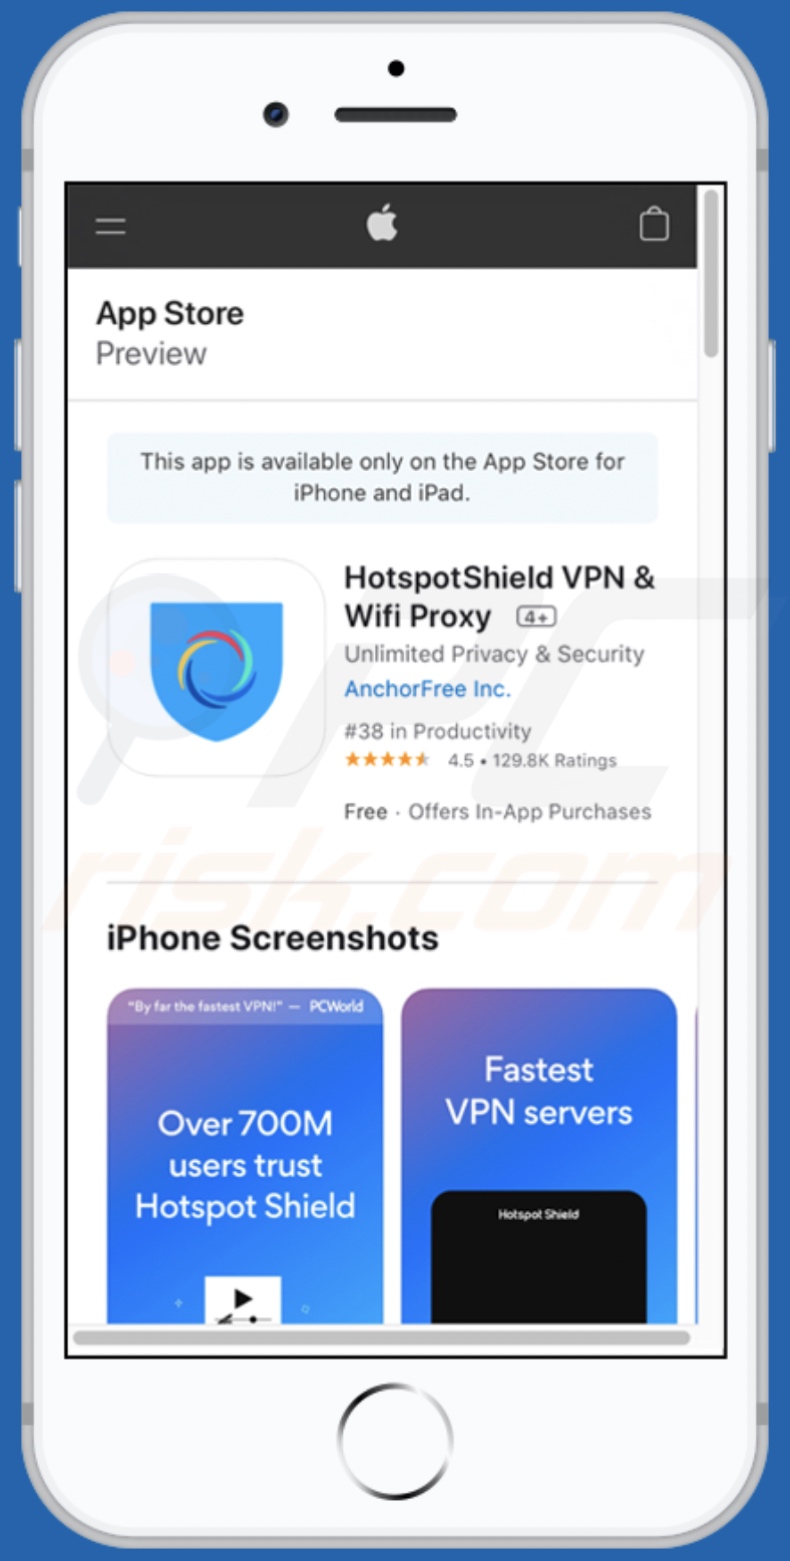 protected-connect[.]com scam website promoted app